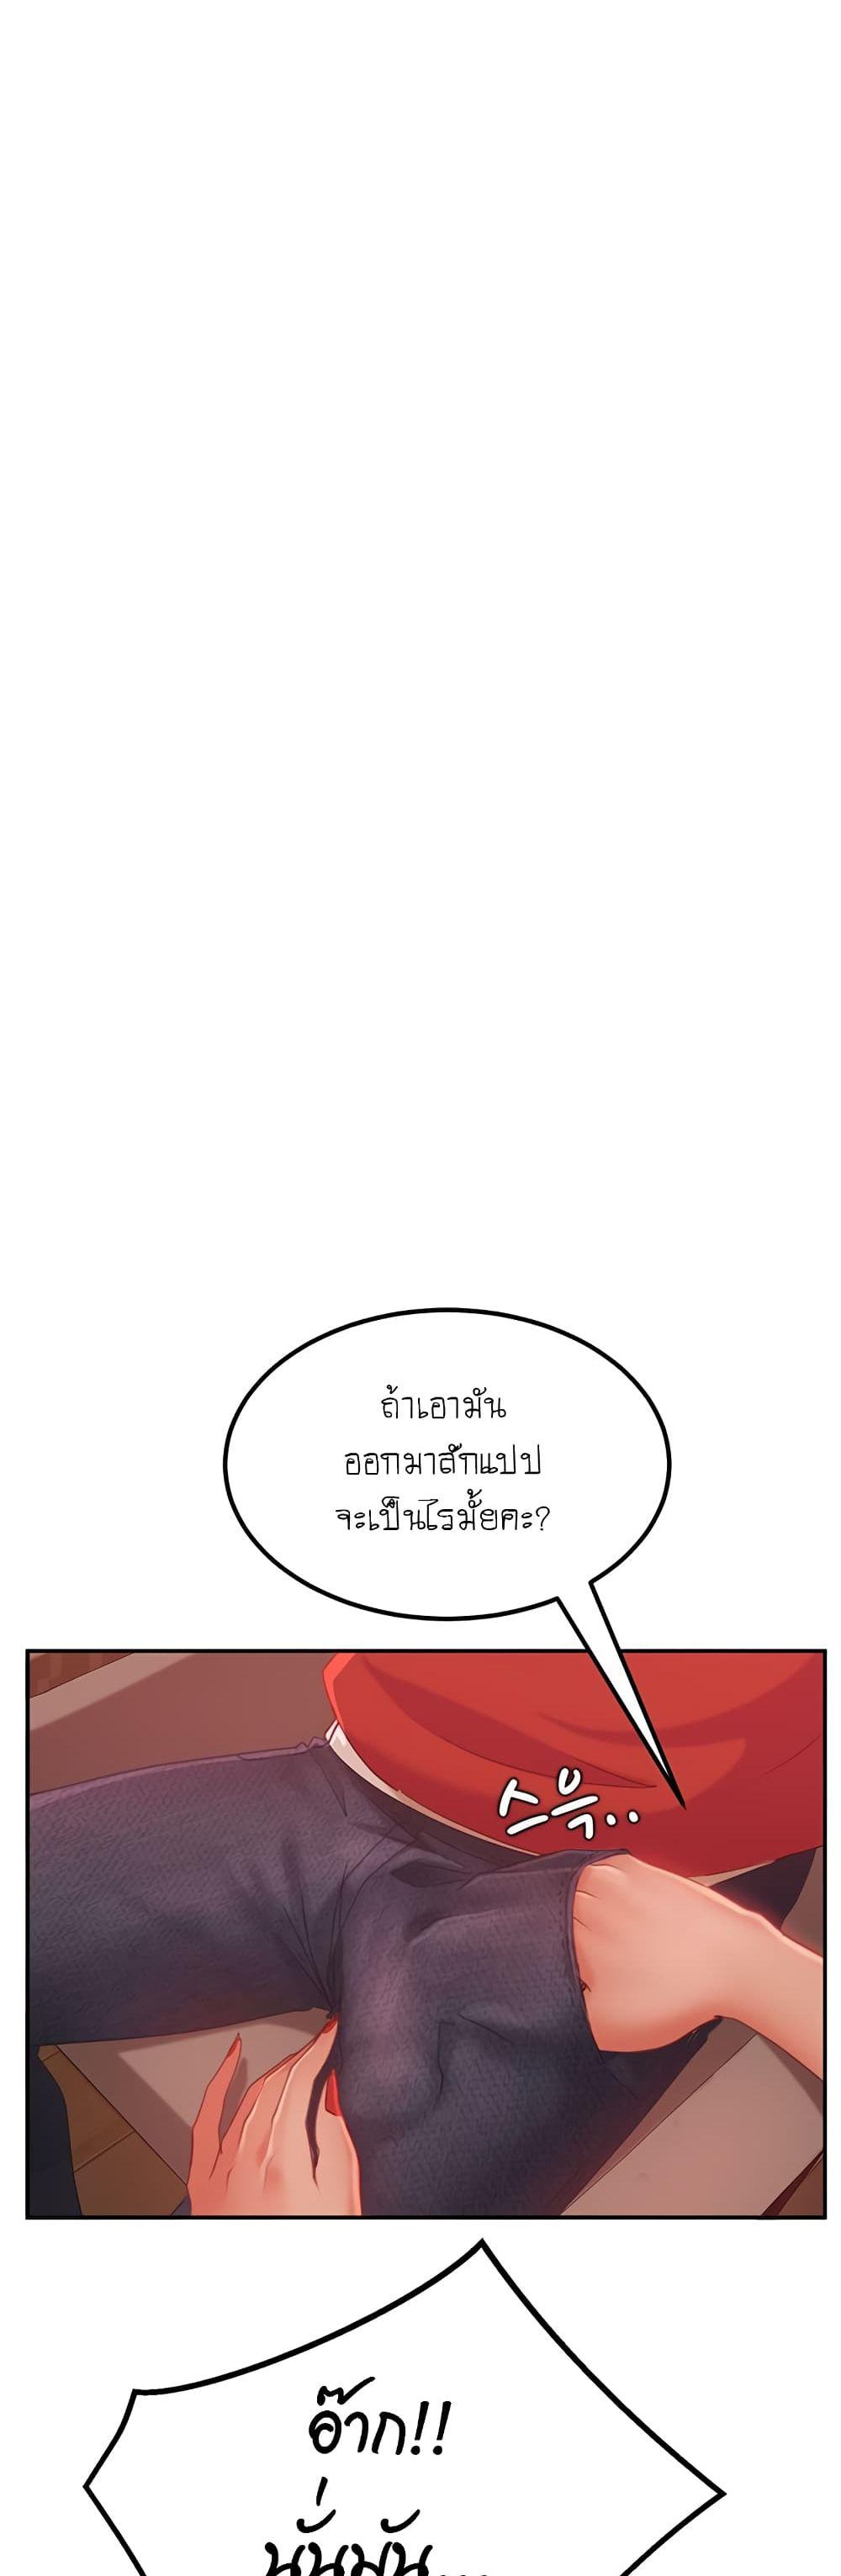 A Twisted Day 4 ภาพ 30